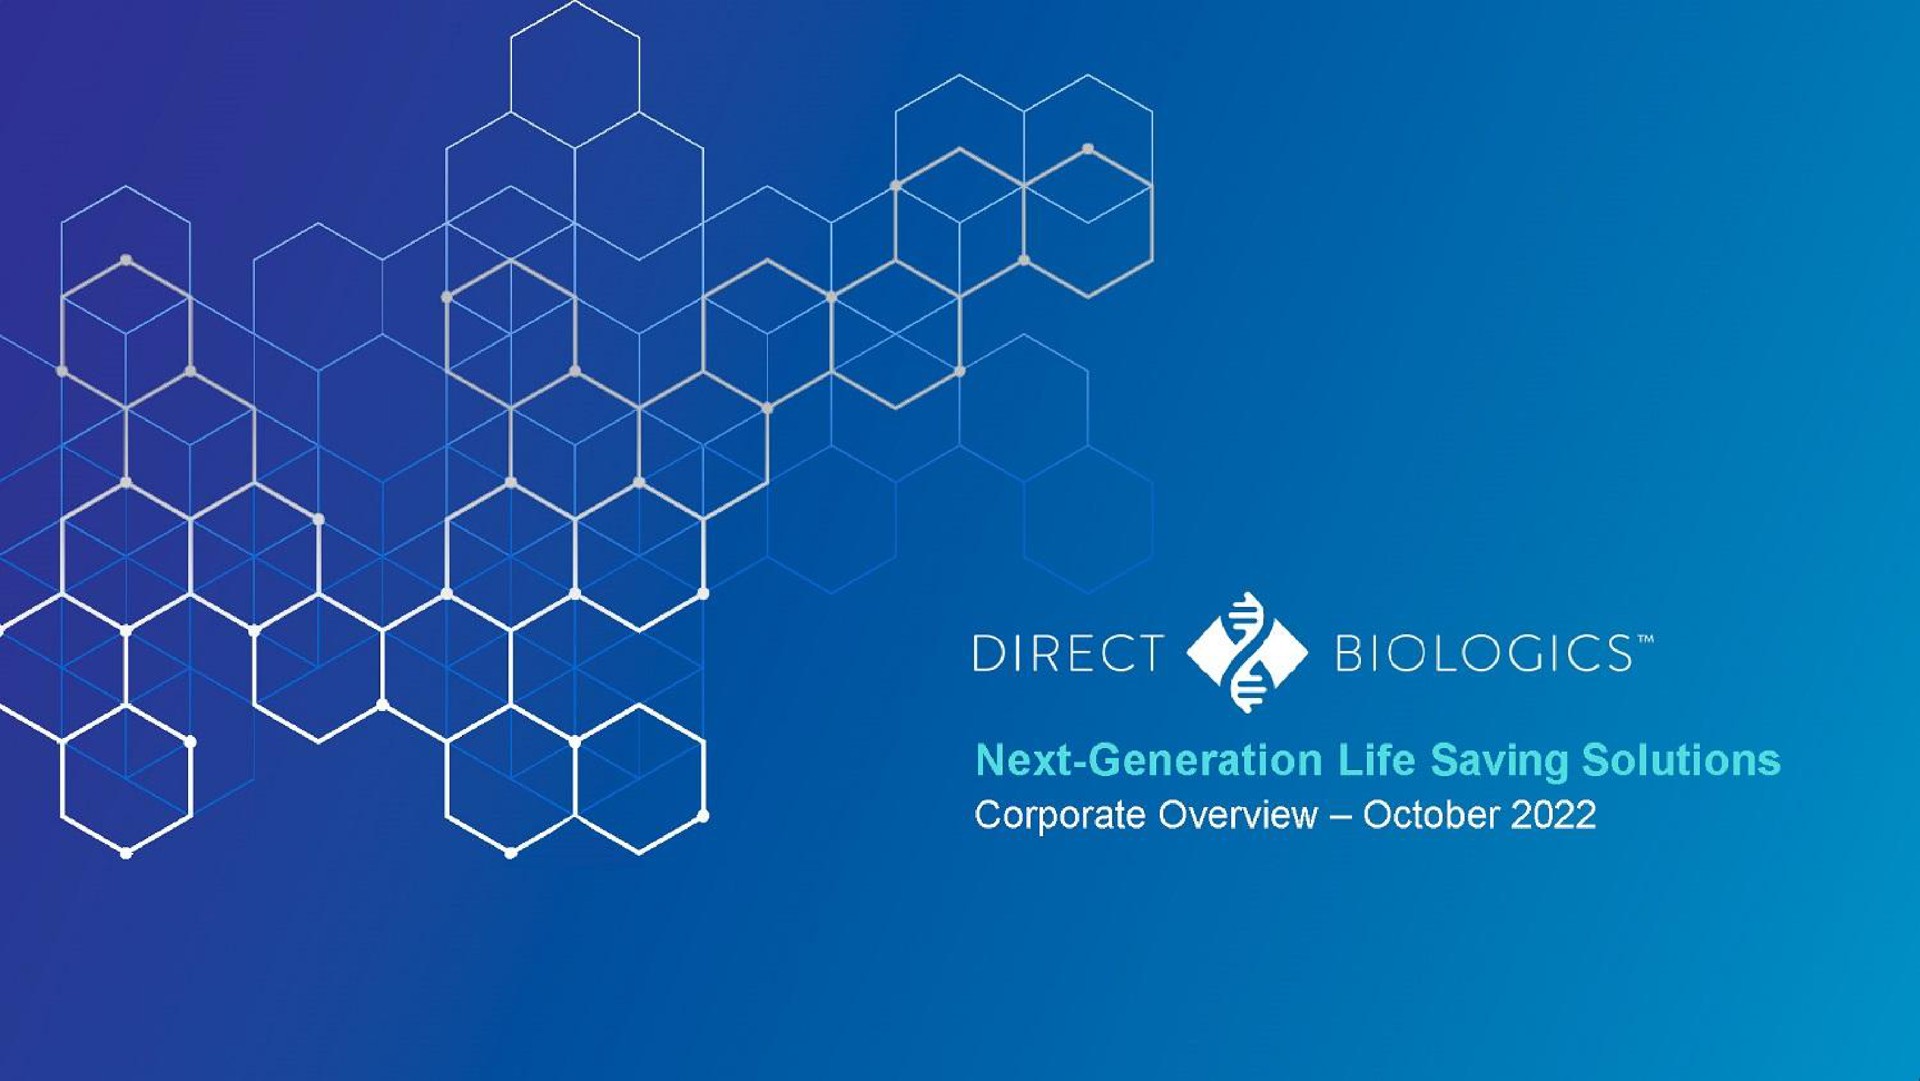 direct a next generation life saving solutions corporate overview | Direct Biologics